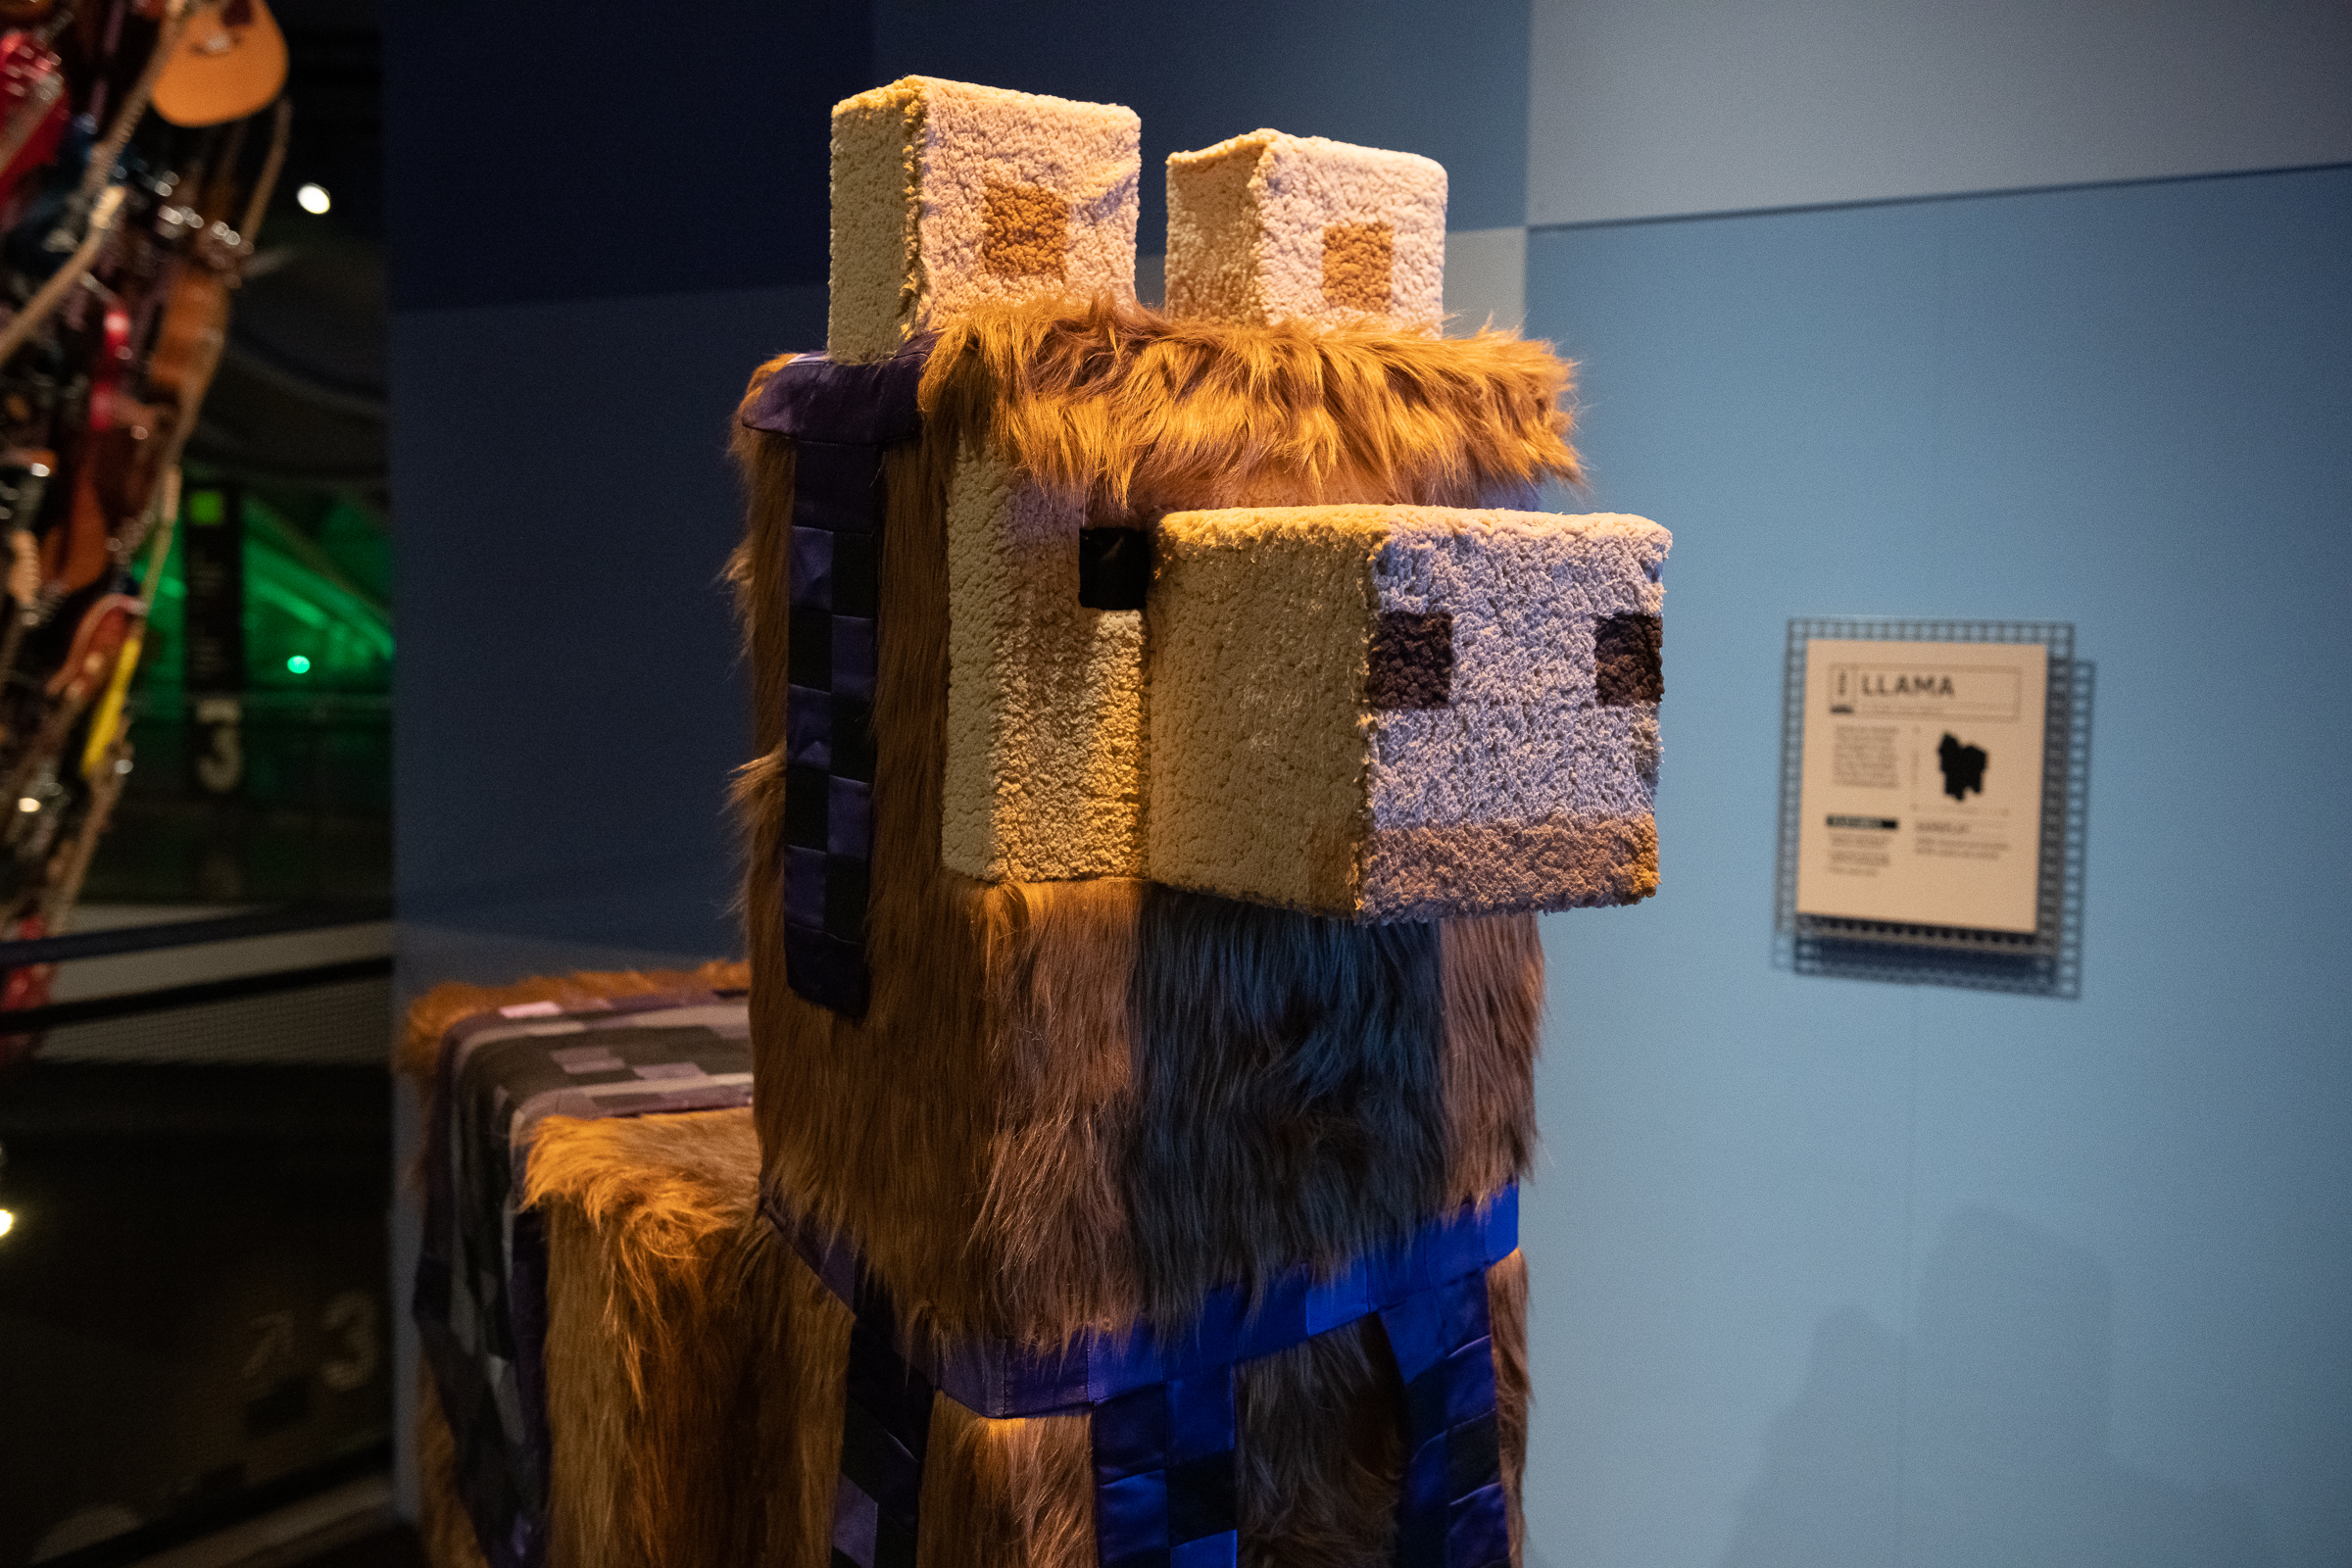 Minecraft: The Exhibition brings gaming to the real world at Seattle's  Museum of Pop Culture